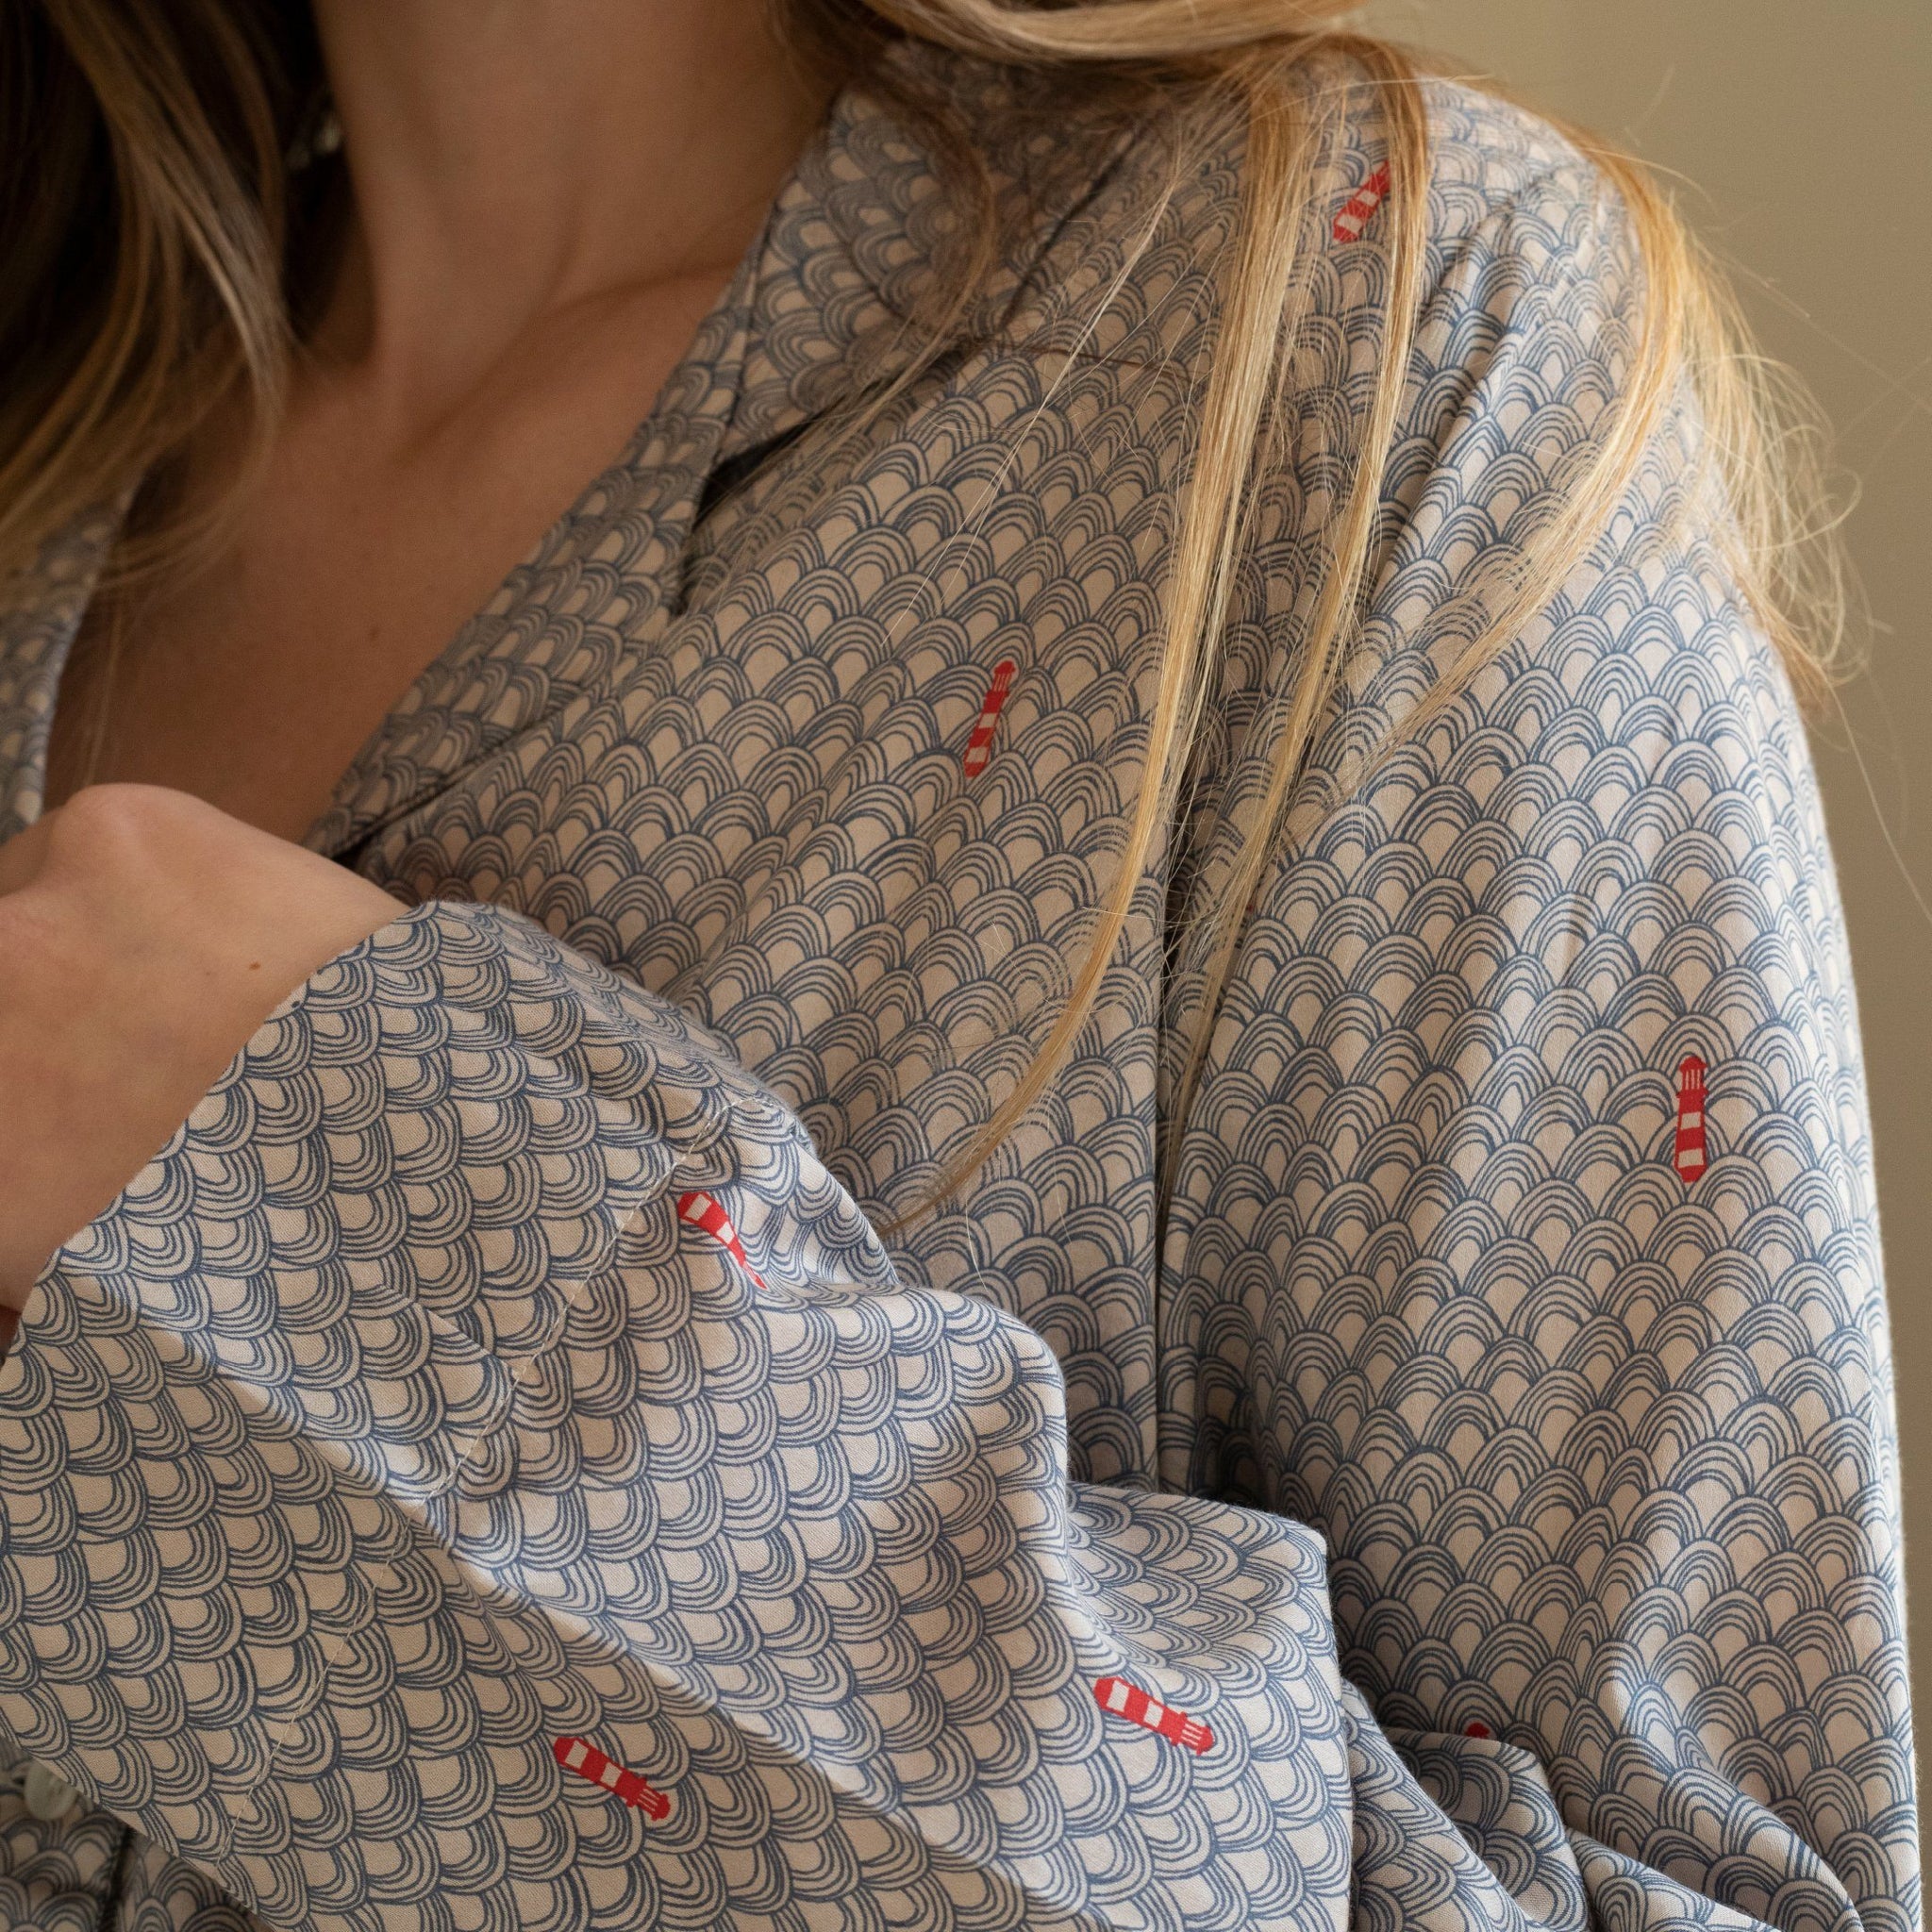 Notes from Yawn | Why we love pyjamas